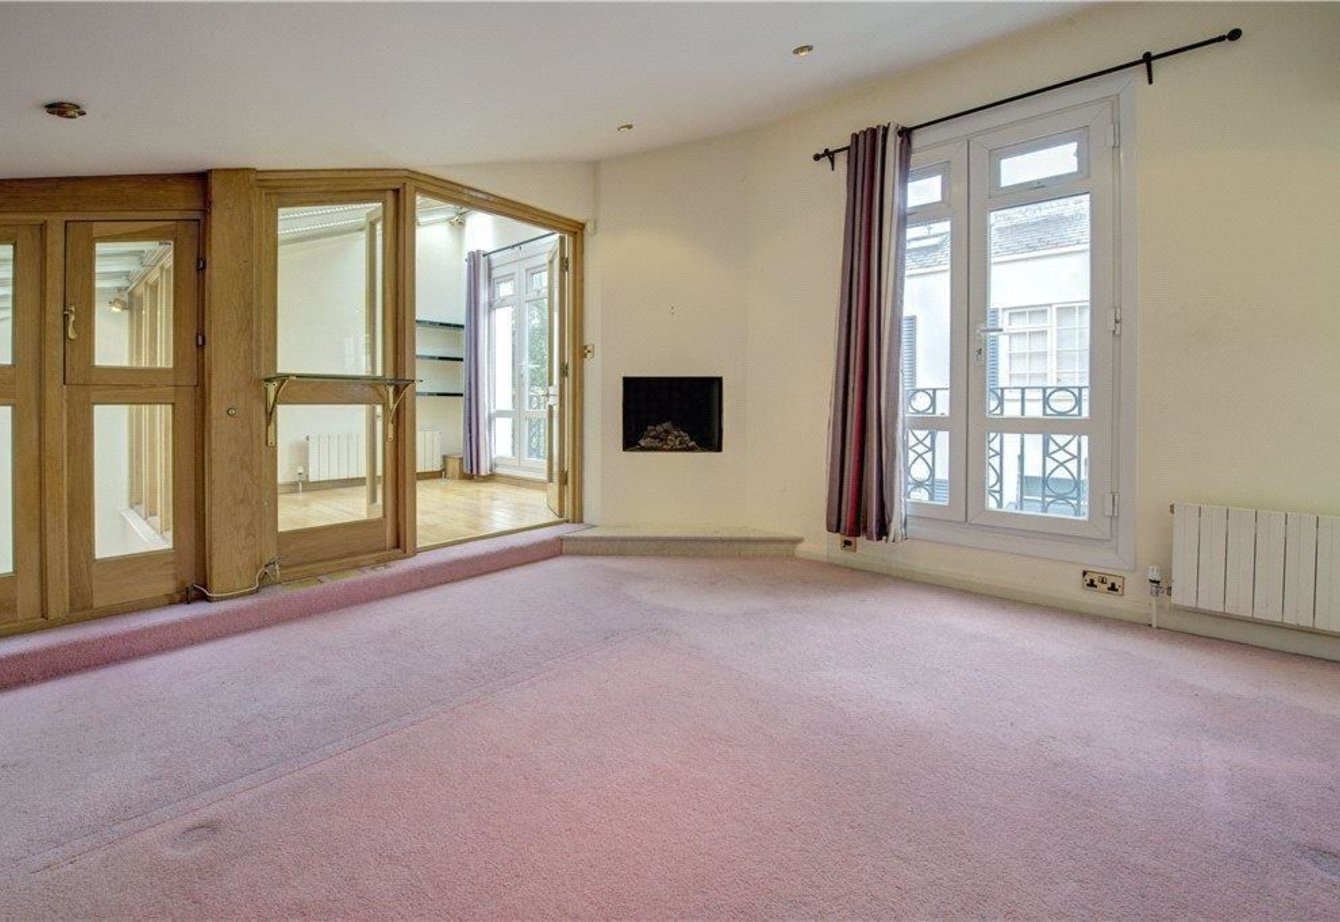 sold-ryders-terrace-london-279-view6